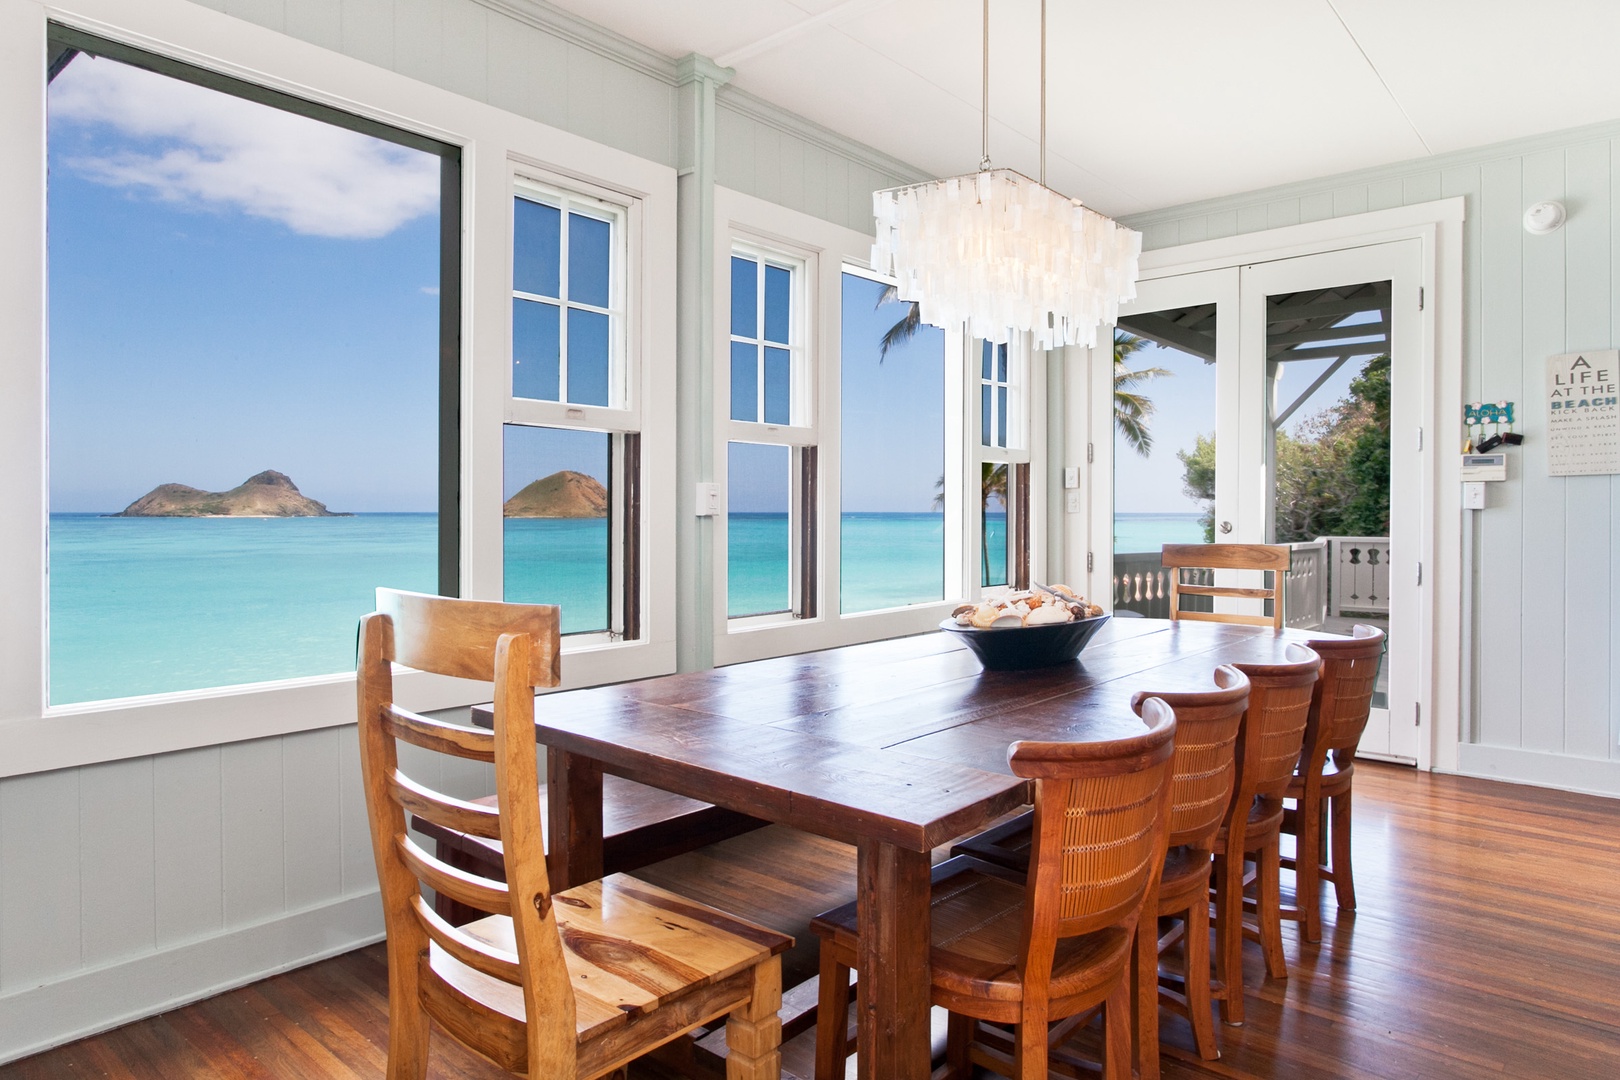 Kailua Vacation Rentals, Hale Mahina Lanikai* - Formal dining area for ten filled with panoramic views for shared meals and meaningful moments.